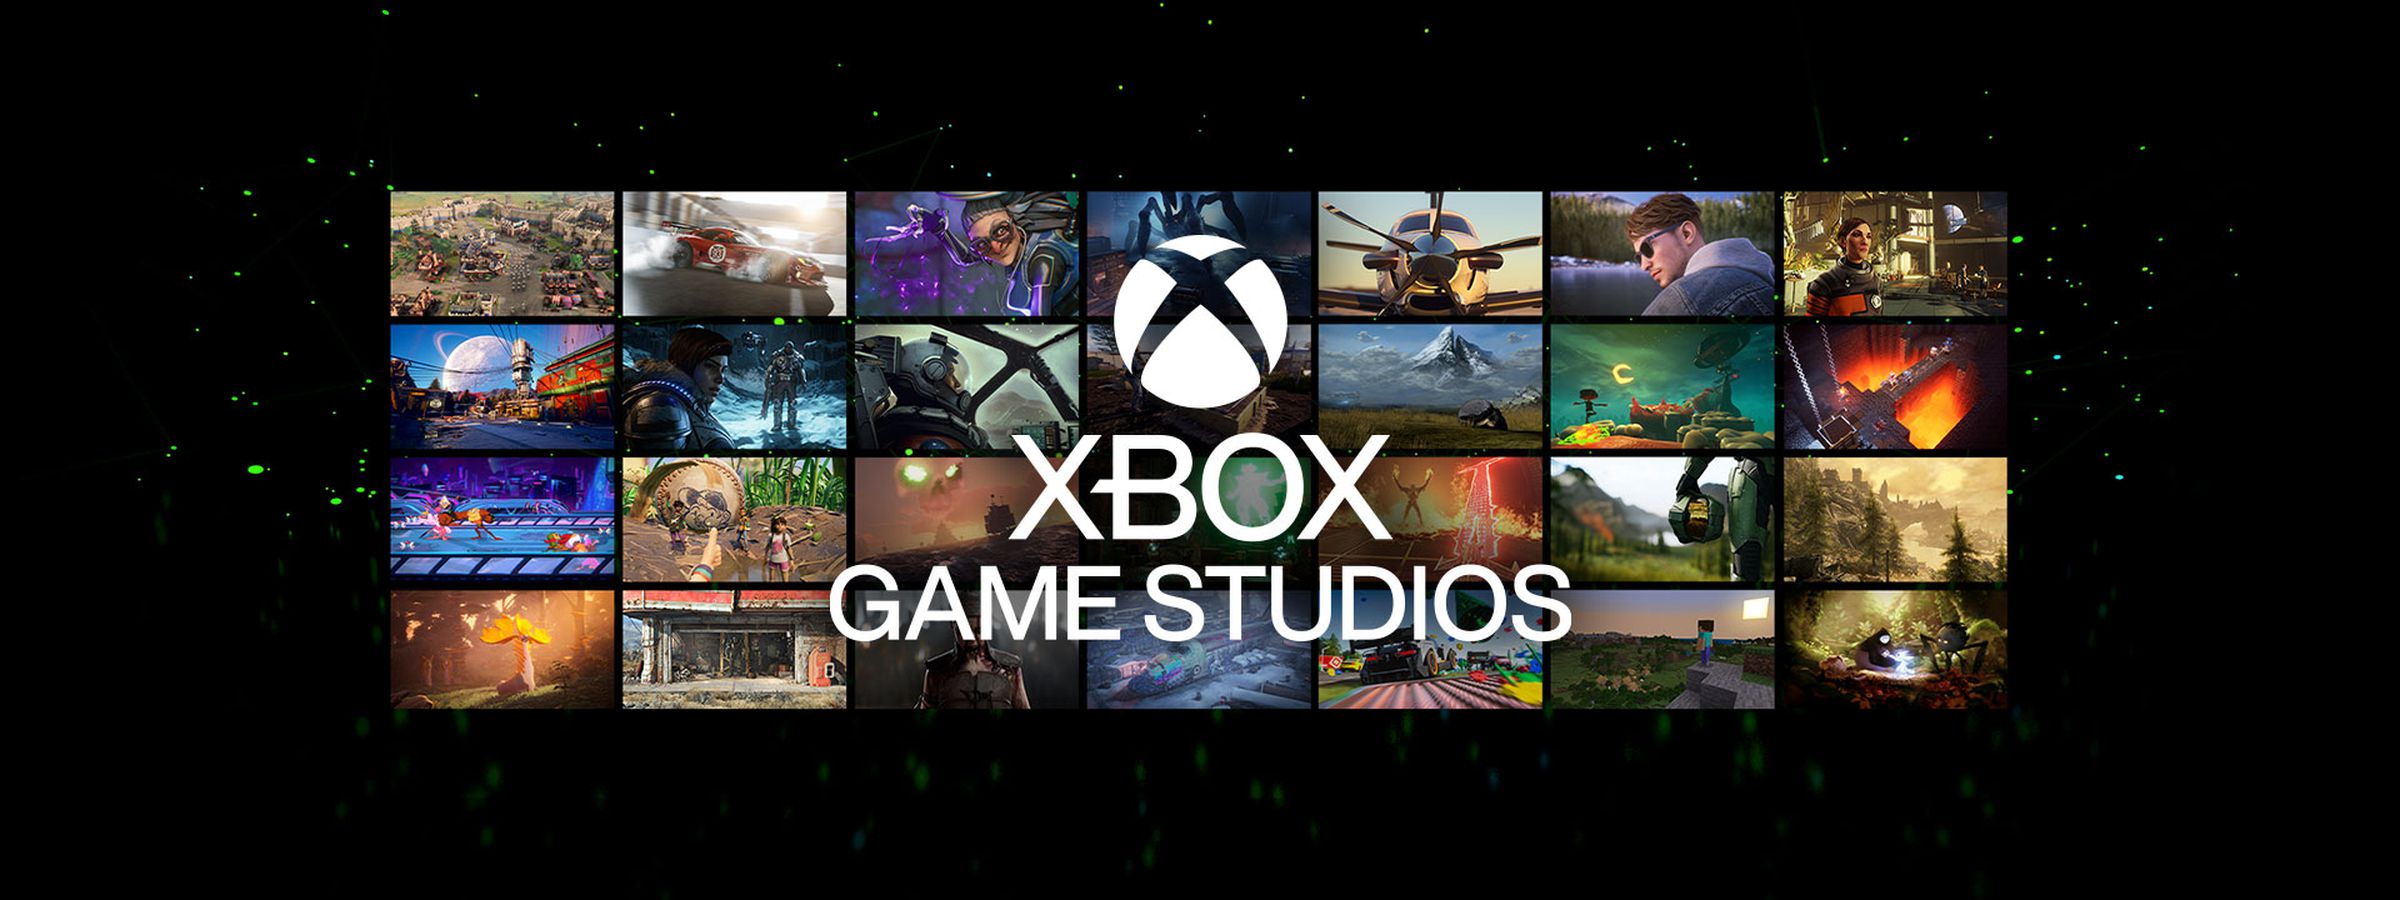 An image showing screenshots from Xbox Game Studios games.